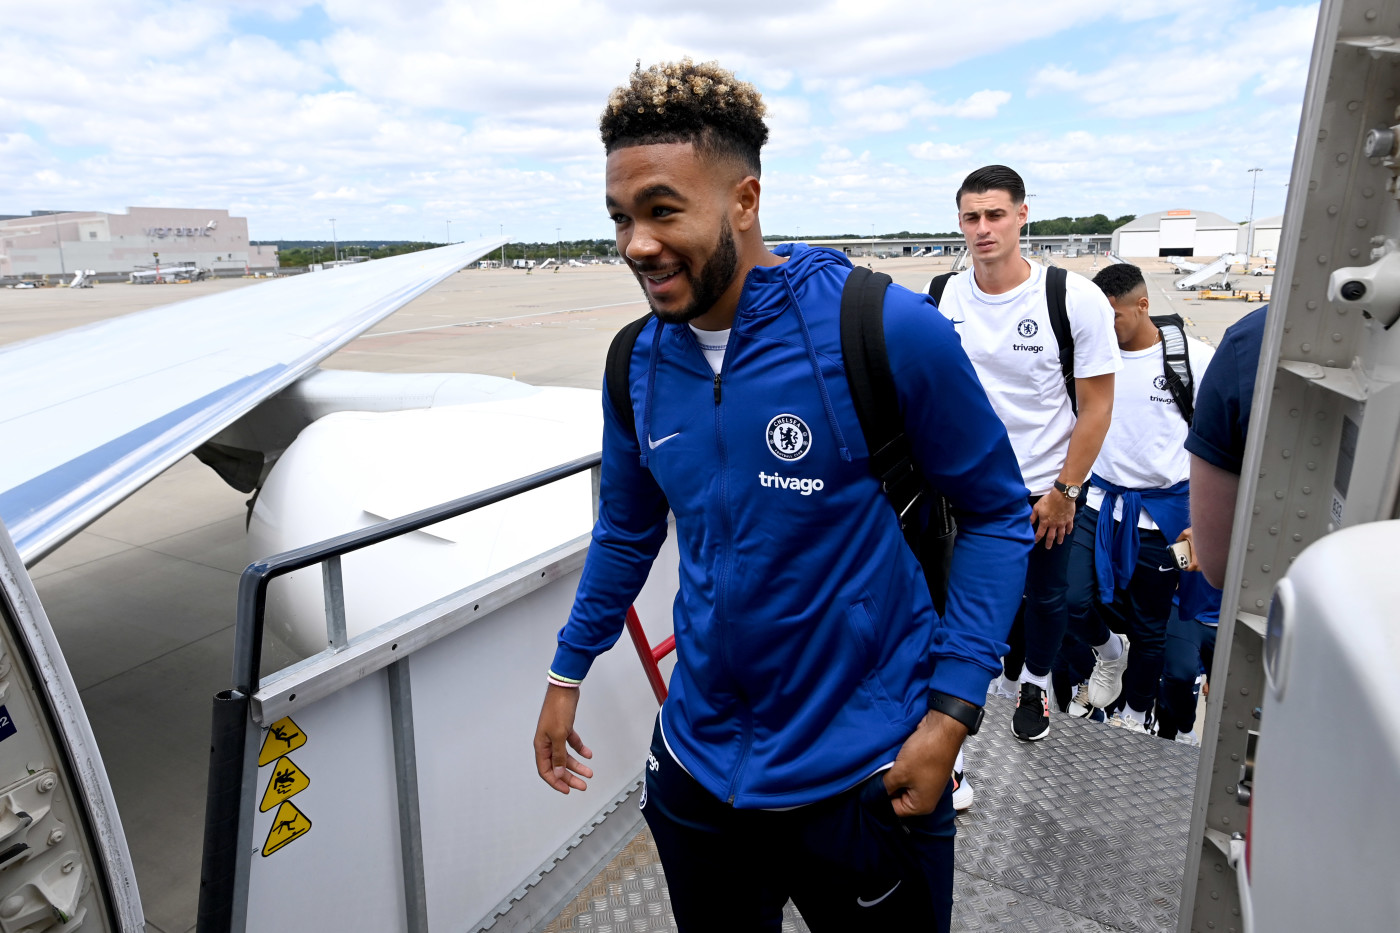 Chelsea to open USA tour in Los Angeles, News